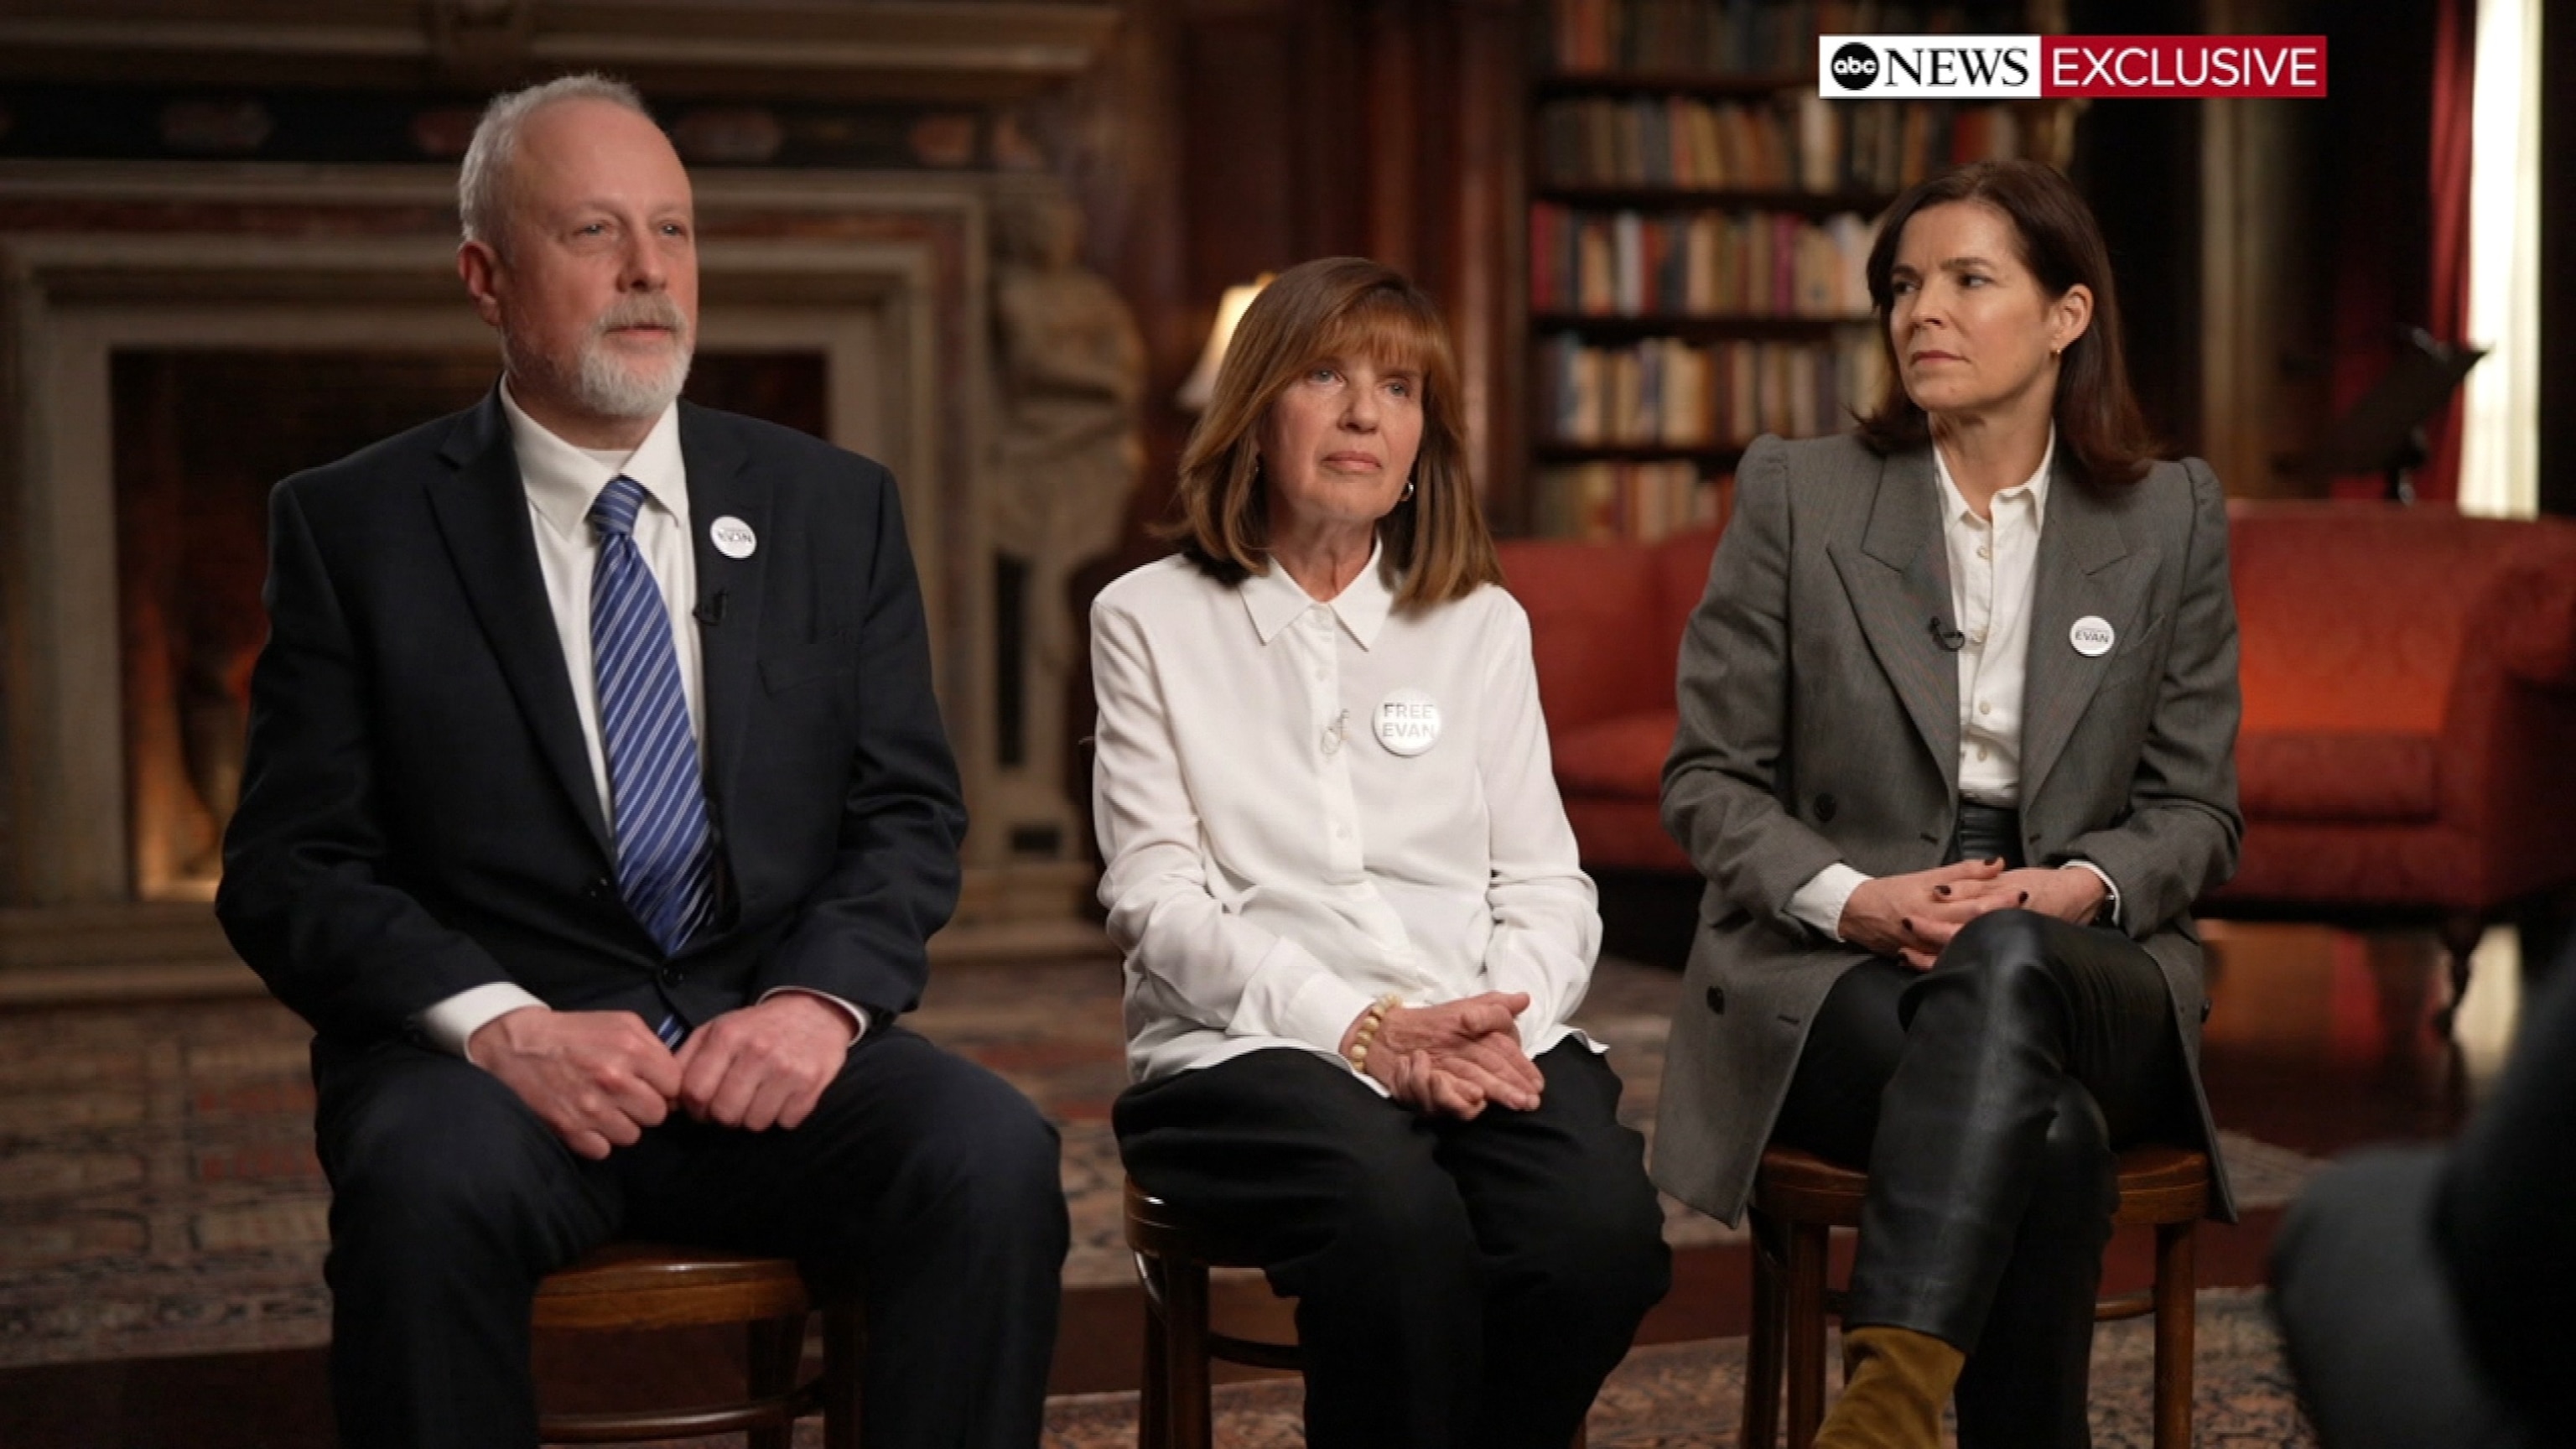 PHOTO: Mikhail Gershkovich and Ella Milman, parents of detained Wall Street Journal reporter Evan Gershkovich as well as Emma Tucker, Editor-in-Chief of The Wall Street Journal speak with George Stephanopoulos during an interview with ABC News.